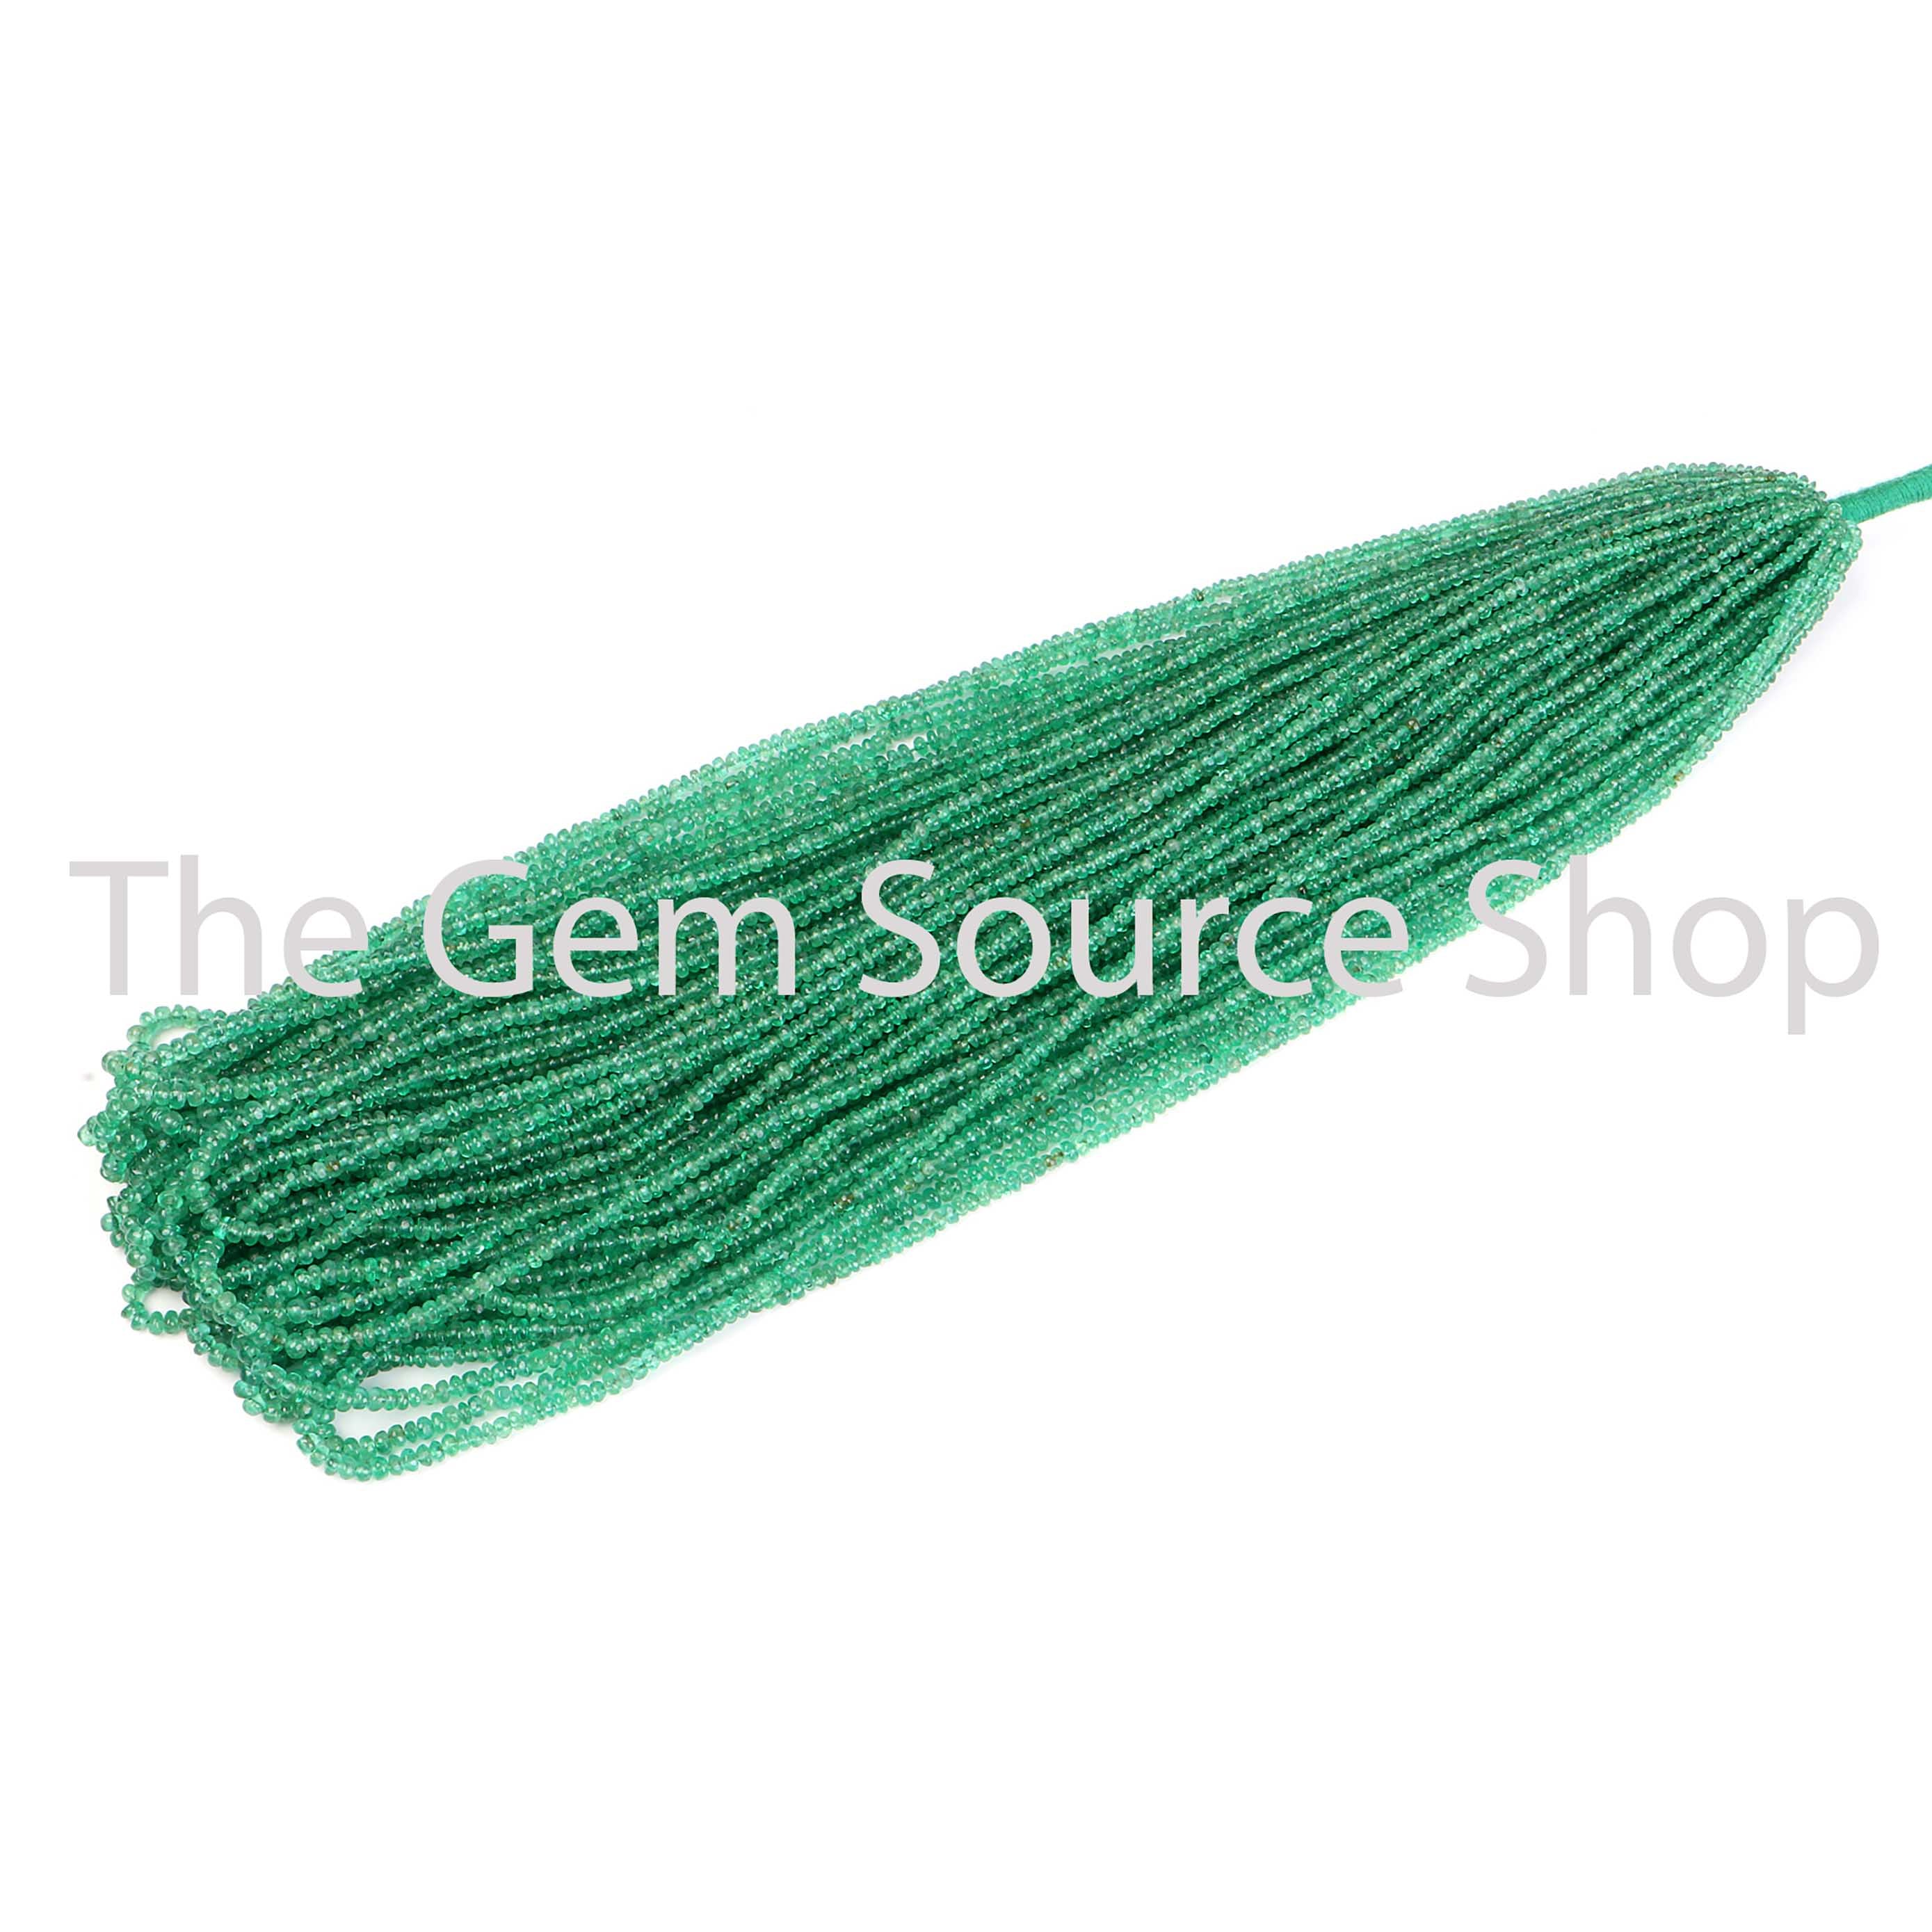 Beads Strand For Jewelry